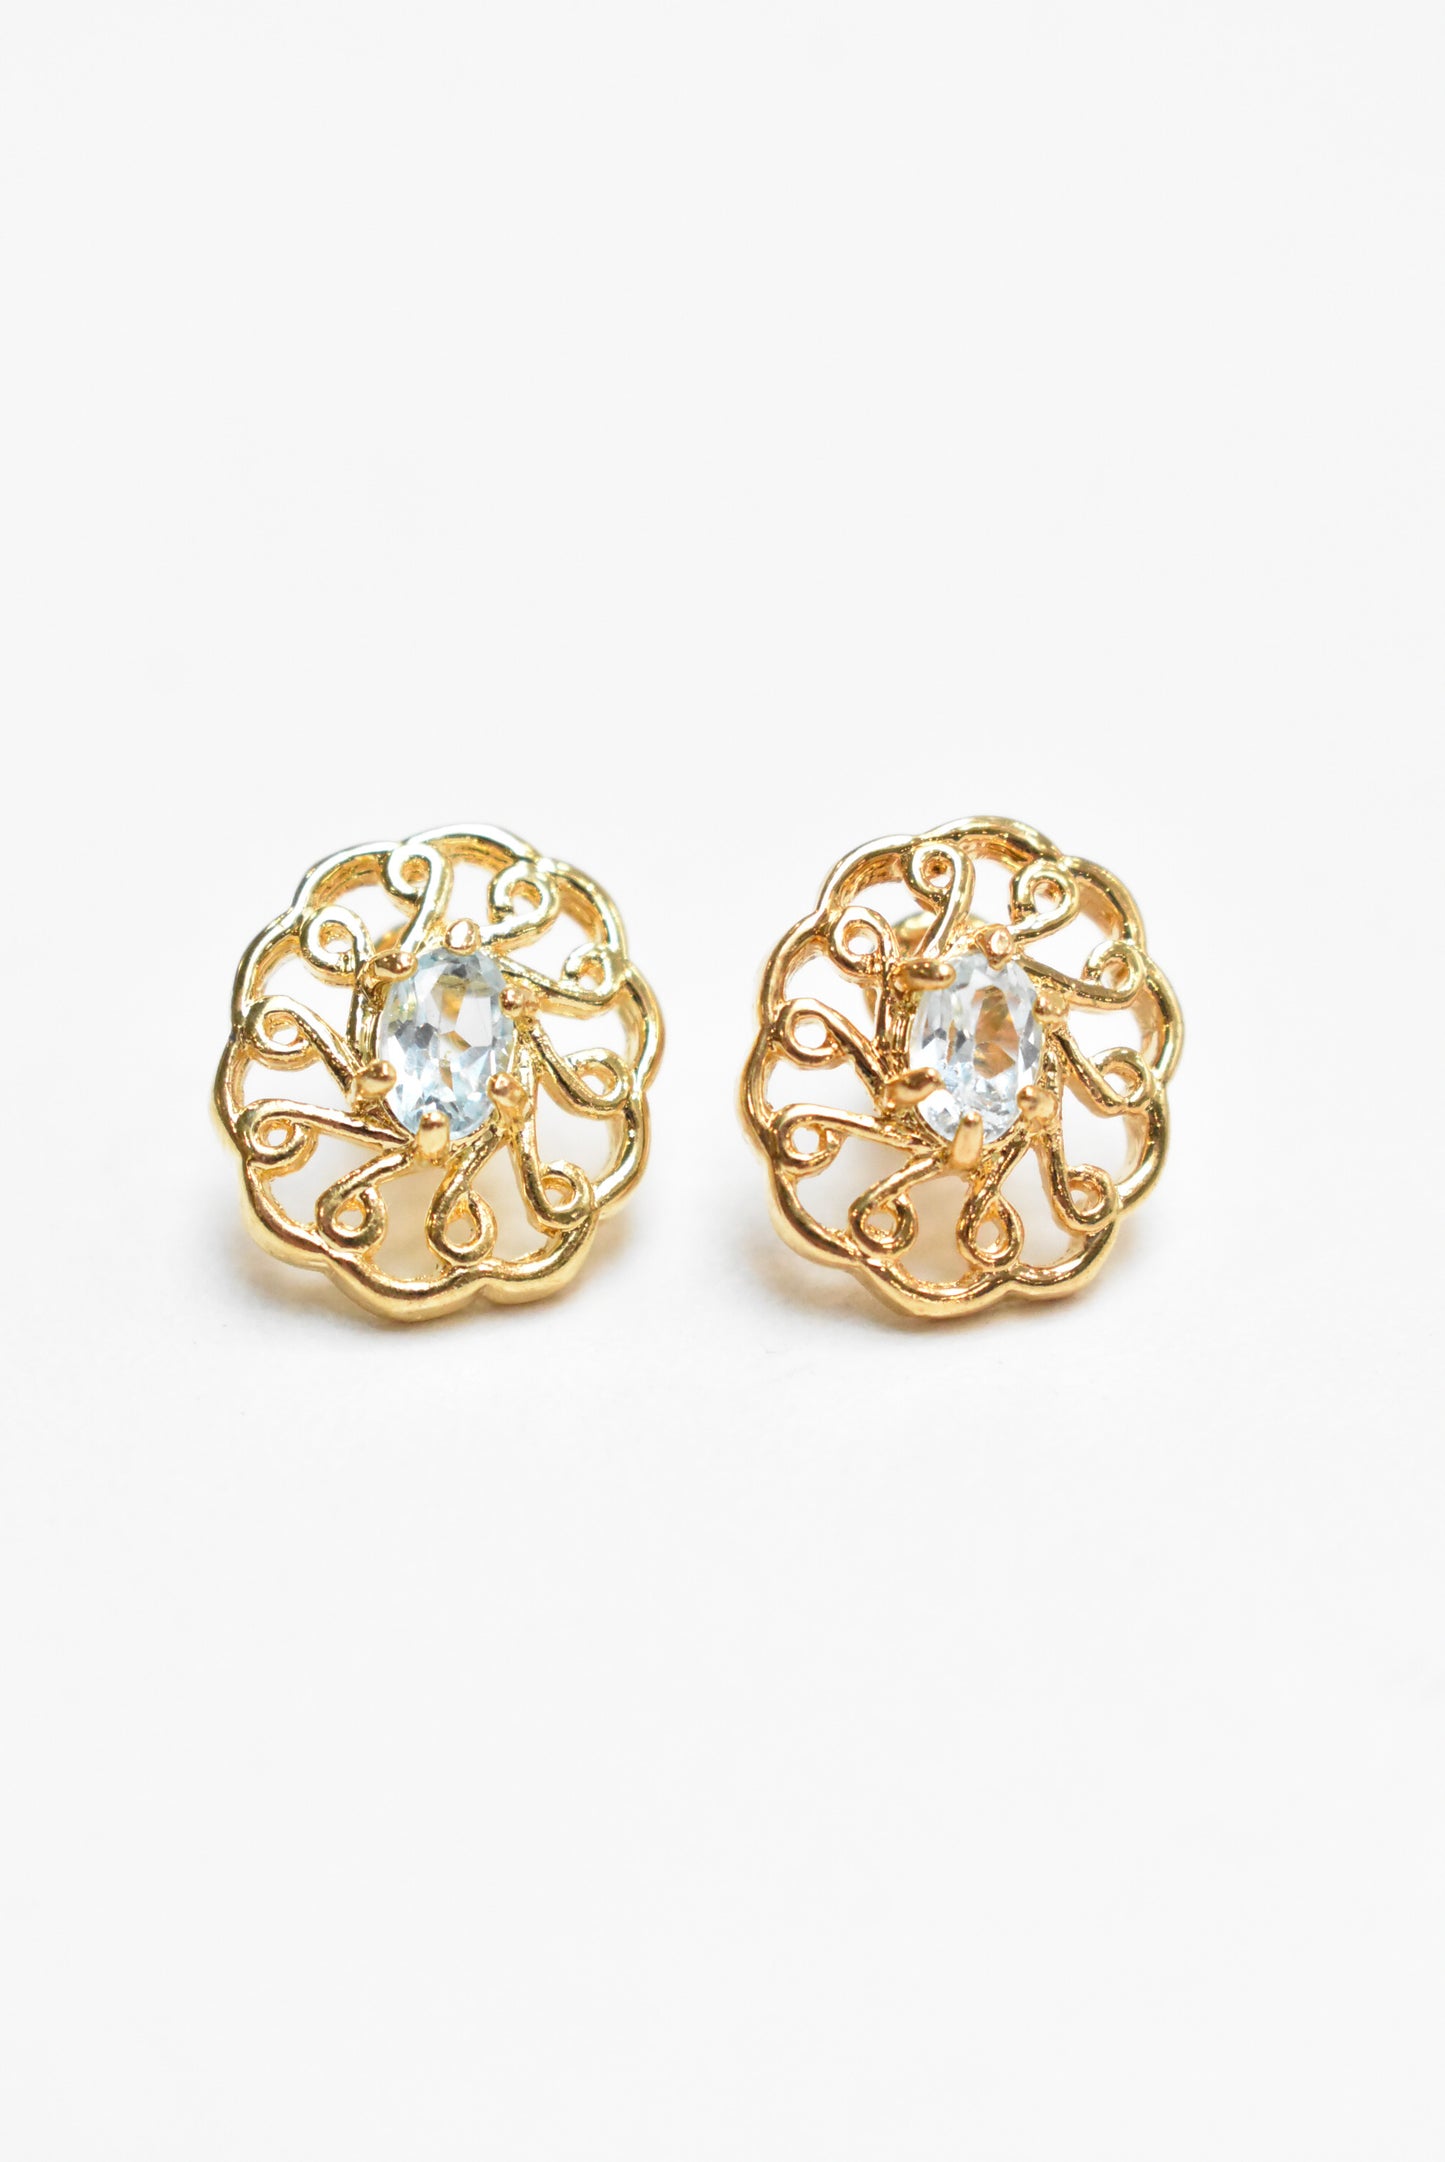 Gold tone earrings with pale blue stone